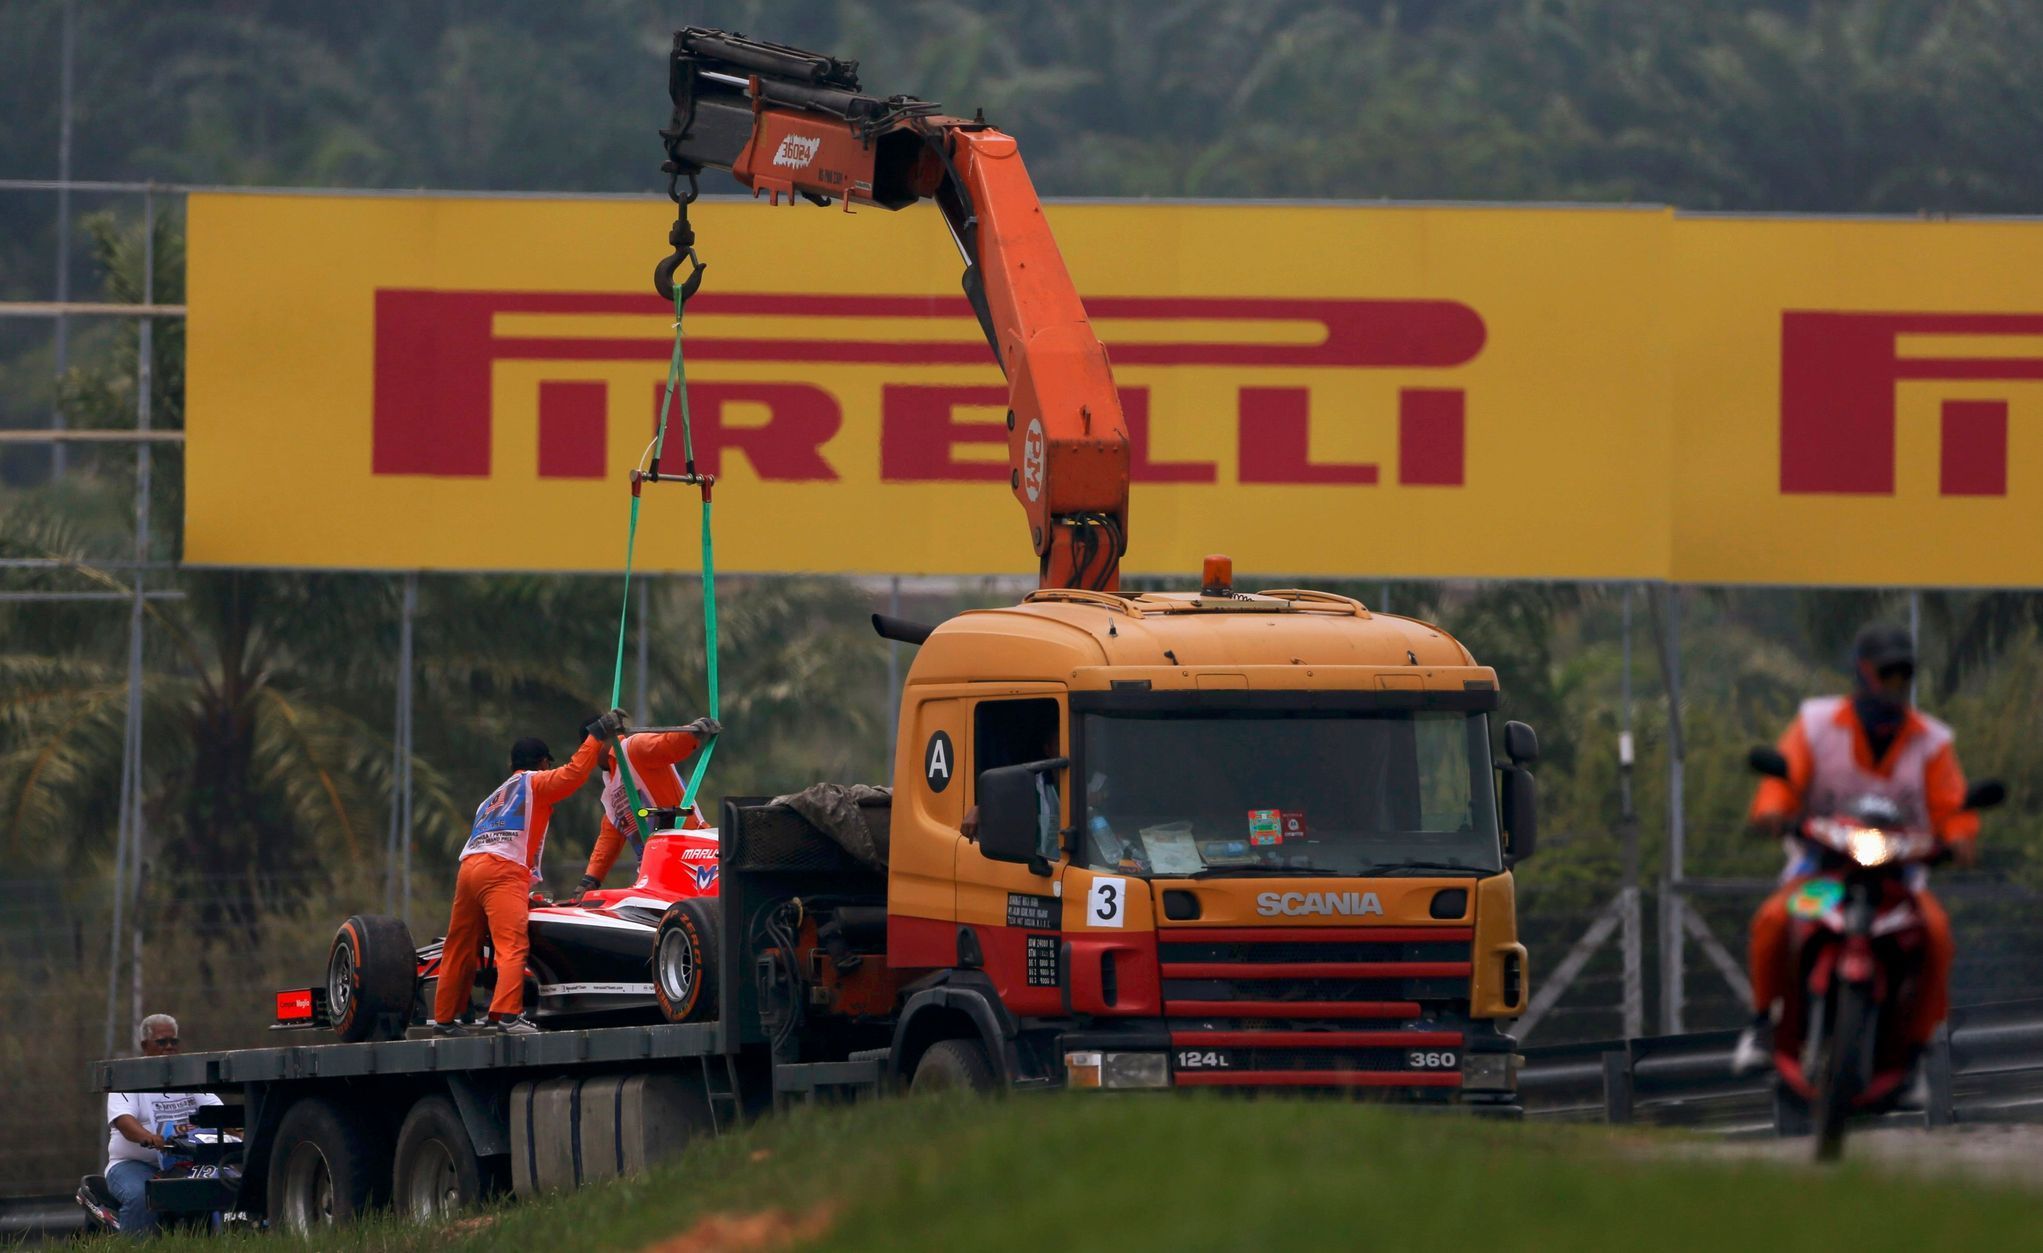 The car of Marussia Formula One driver Chilton is removed from the tracks during the second practice session of the Malaysian F1 Grand Prix at Sepang International Circuit outside Kuala Lumpur